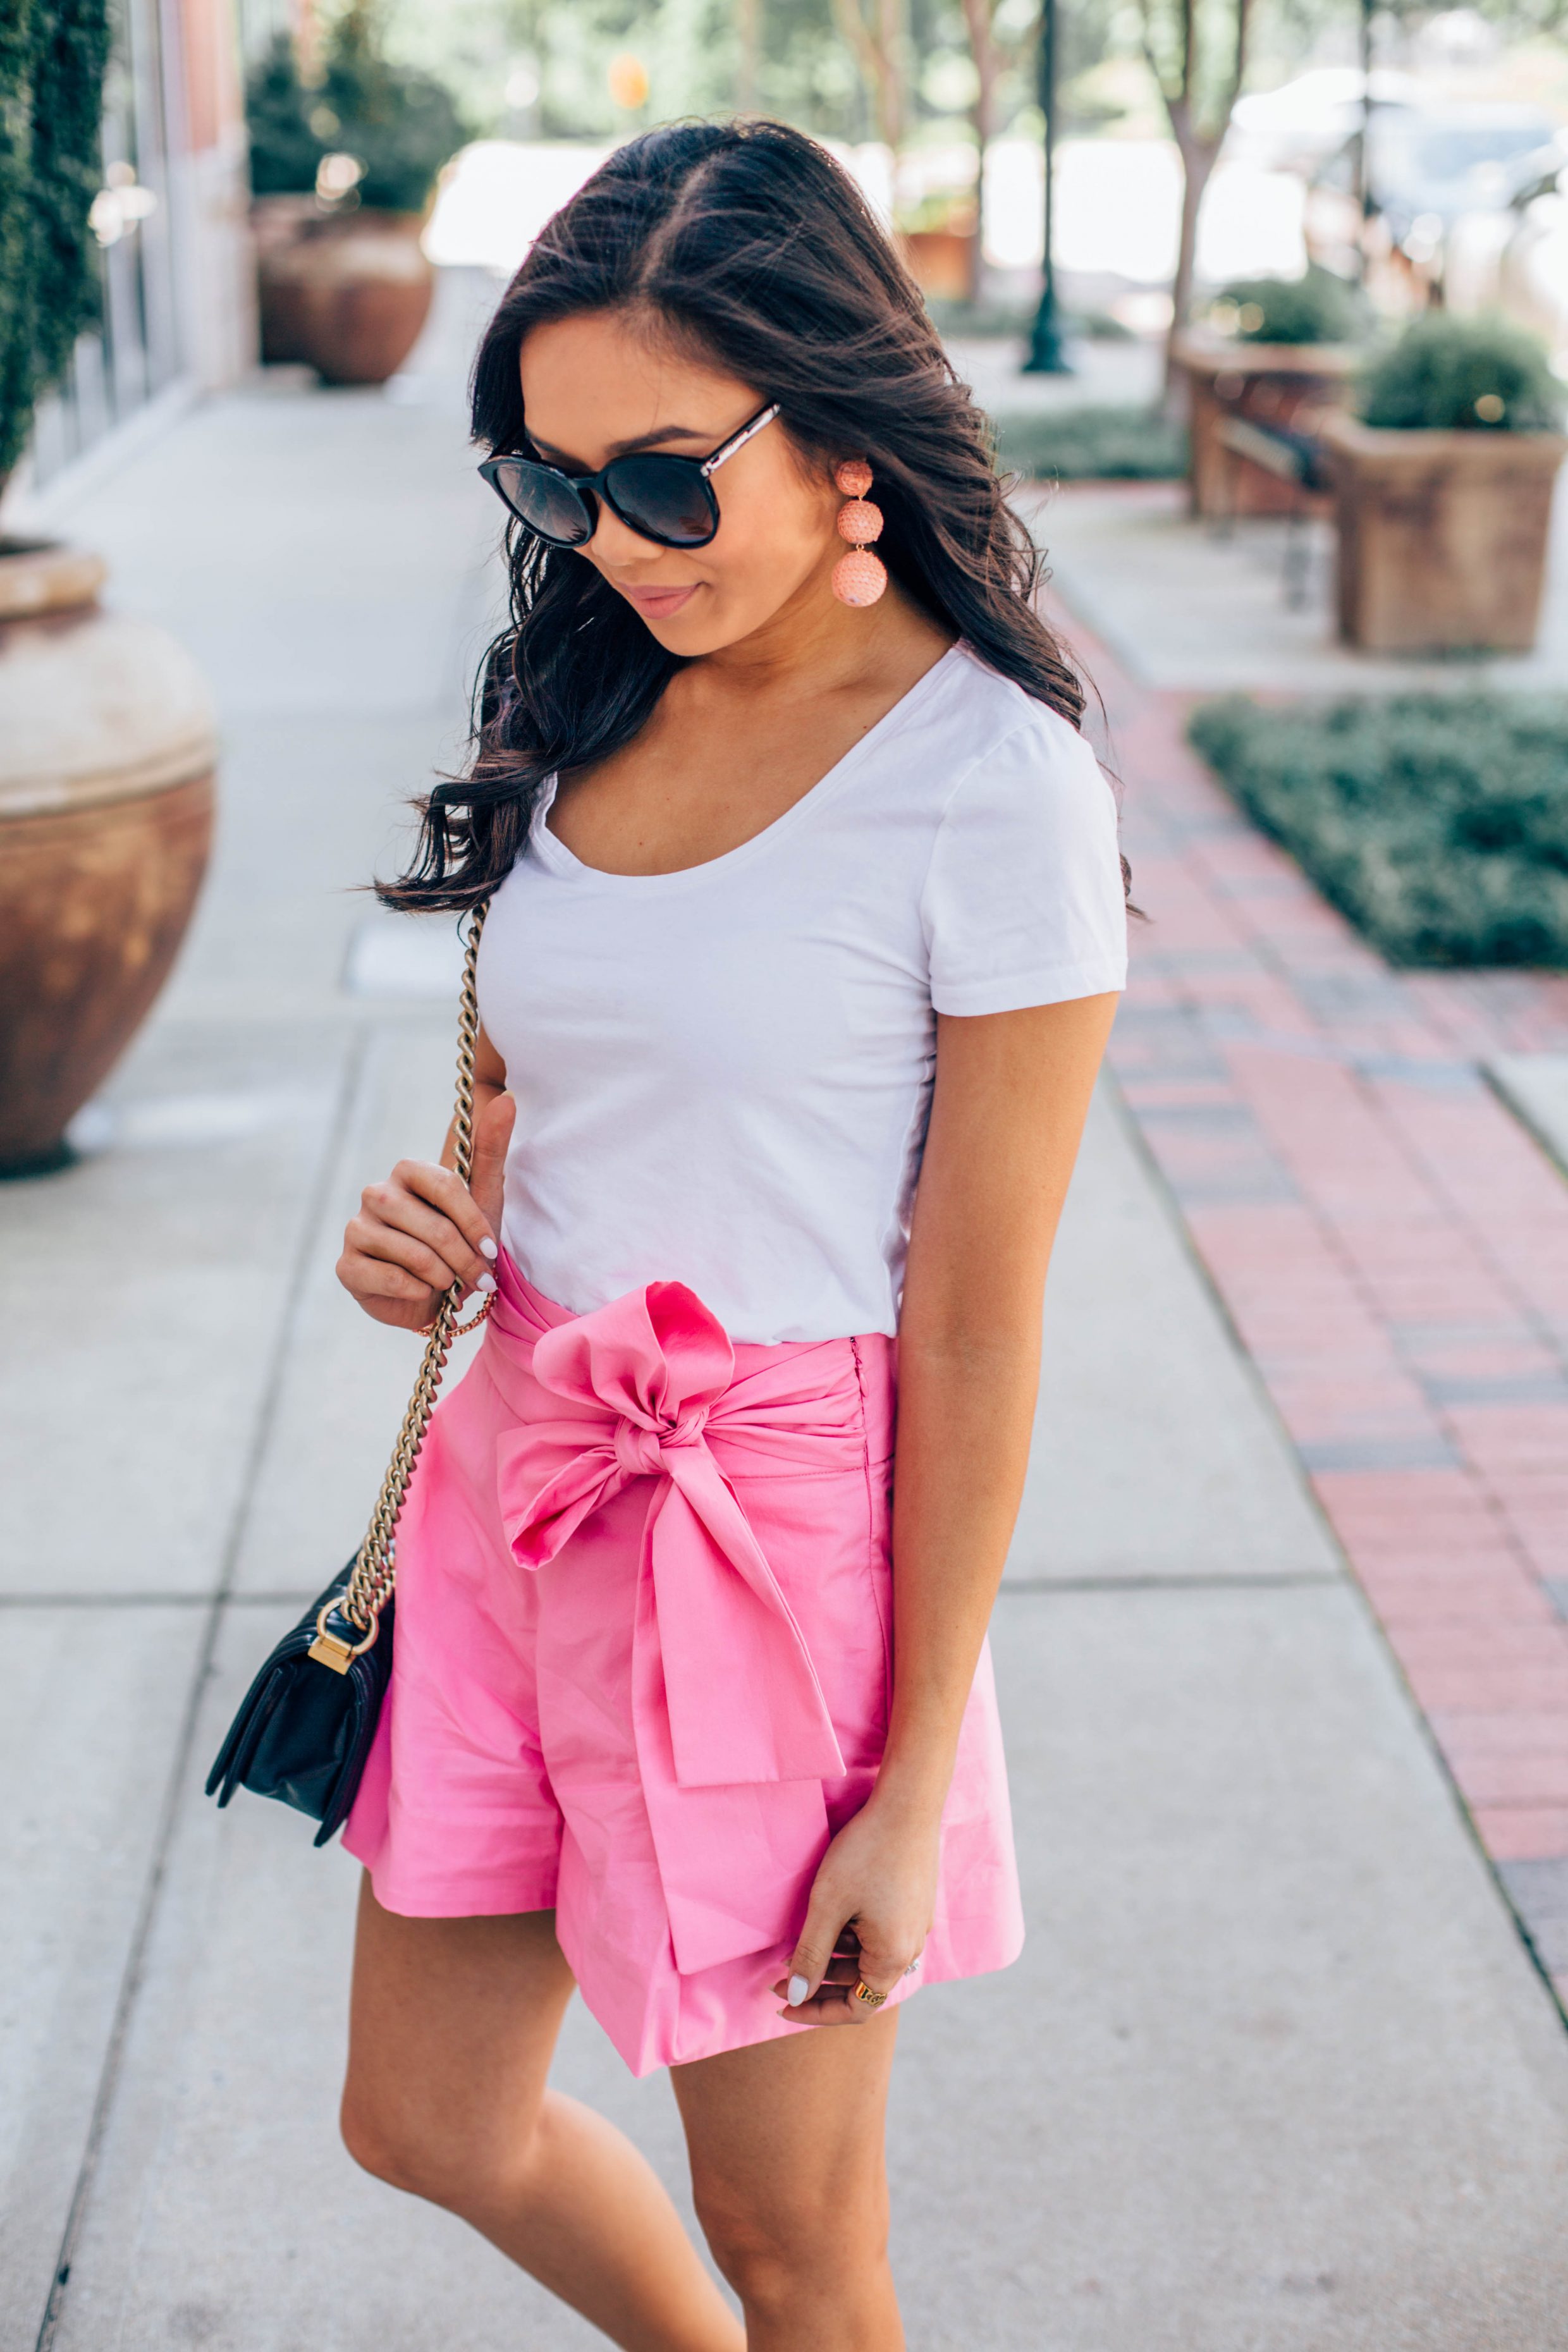 Put a Bow on It :: Tie Waist Shorts + White Tee - Color & Chic